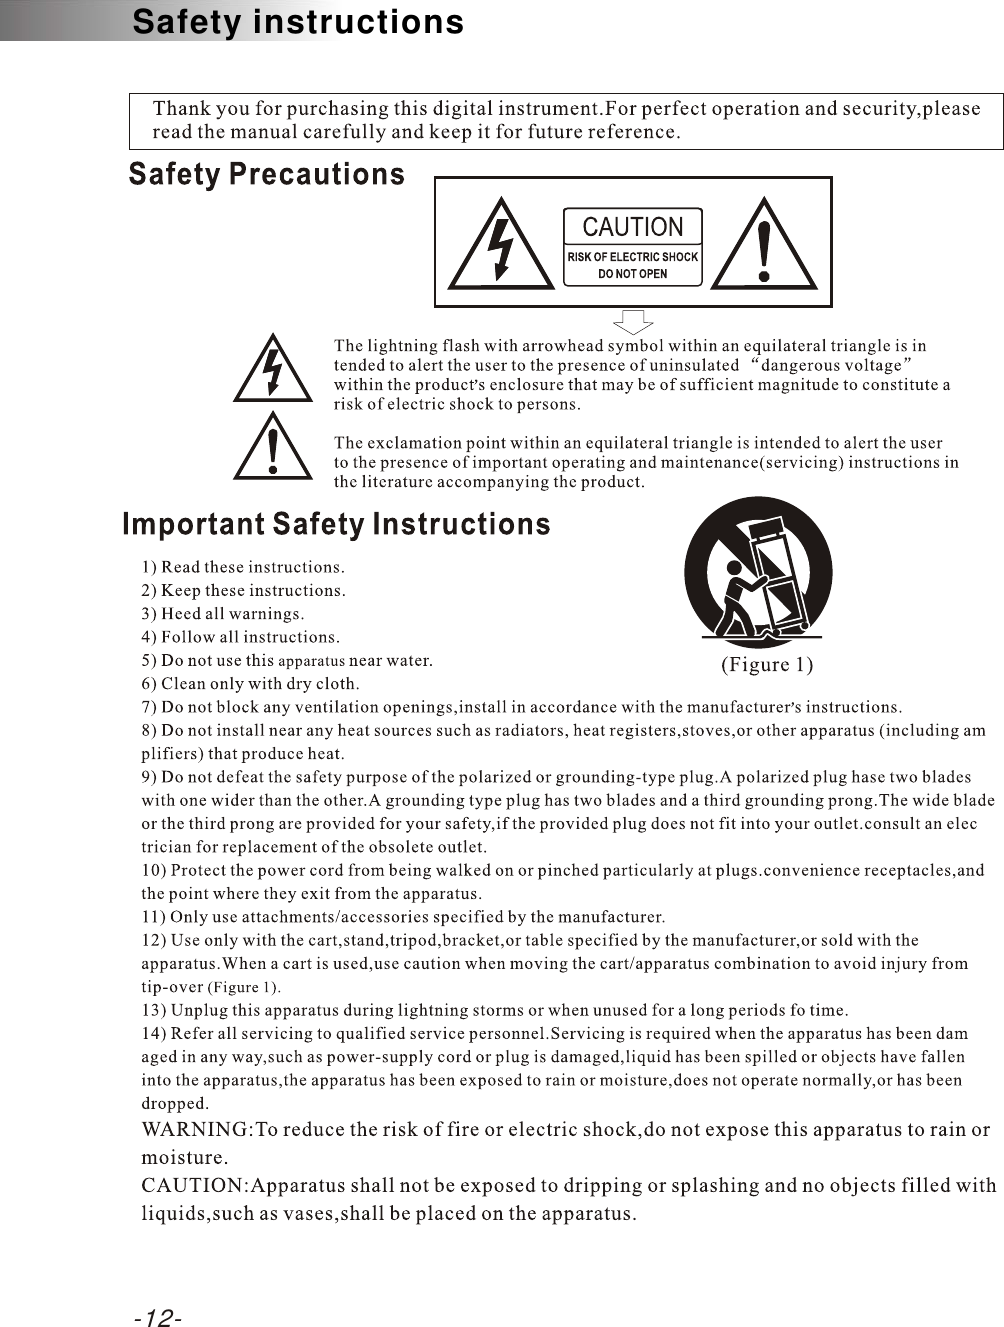 -12-Safety instructions